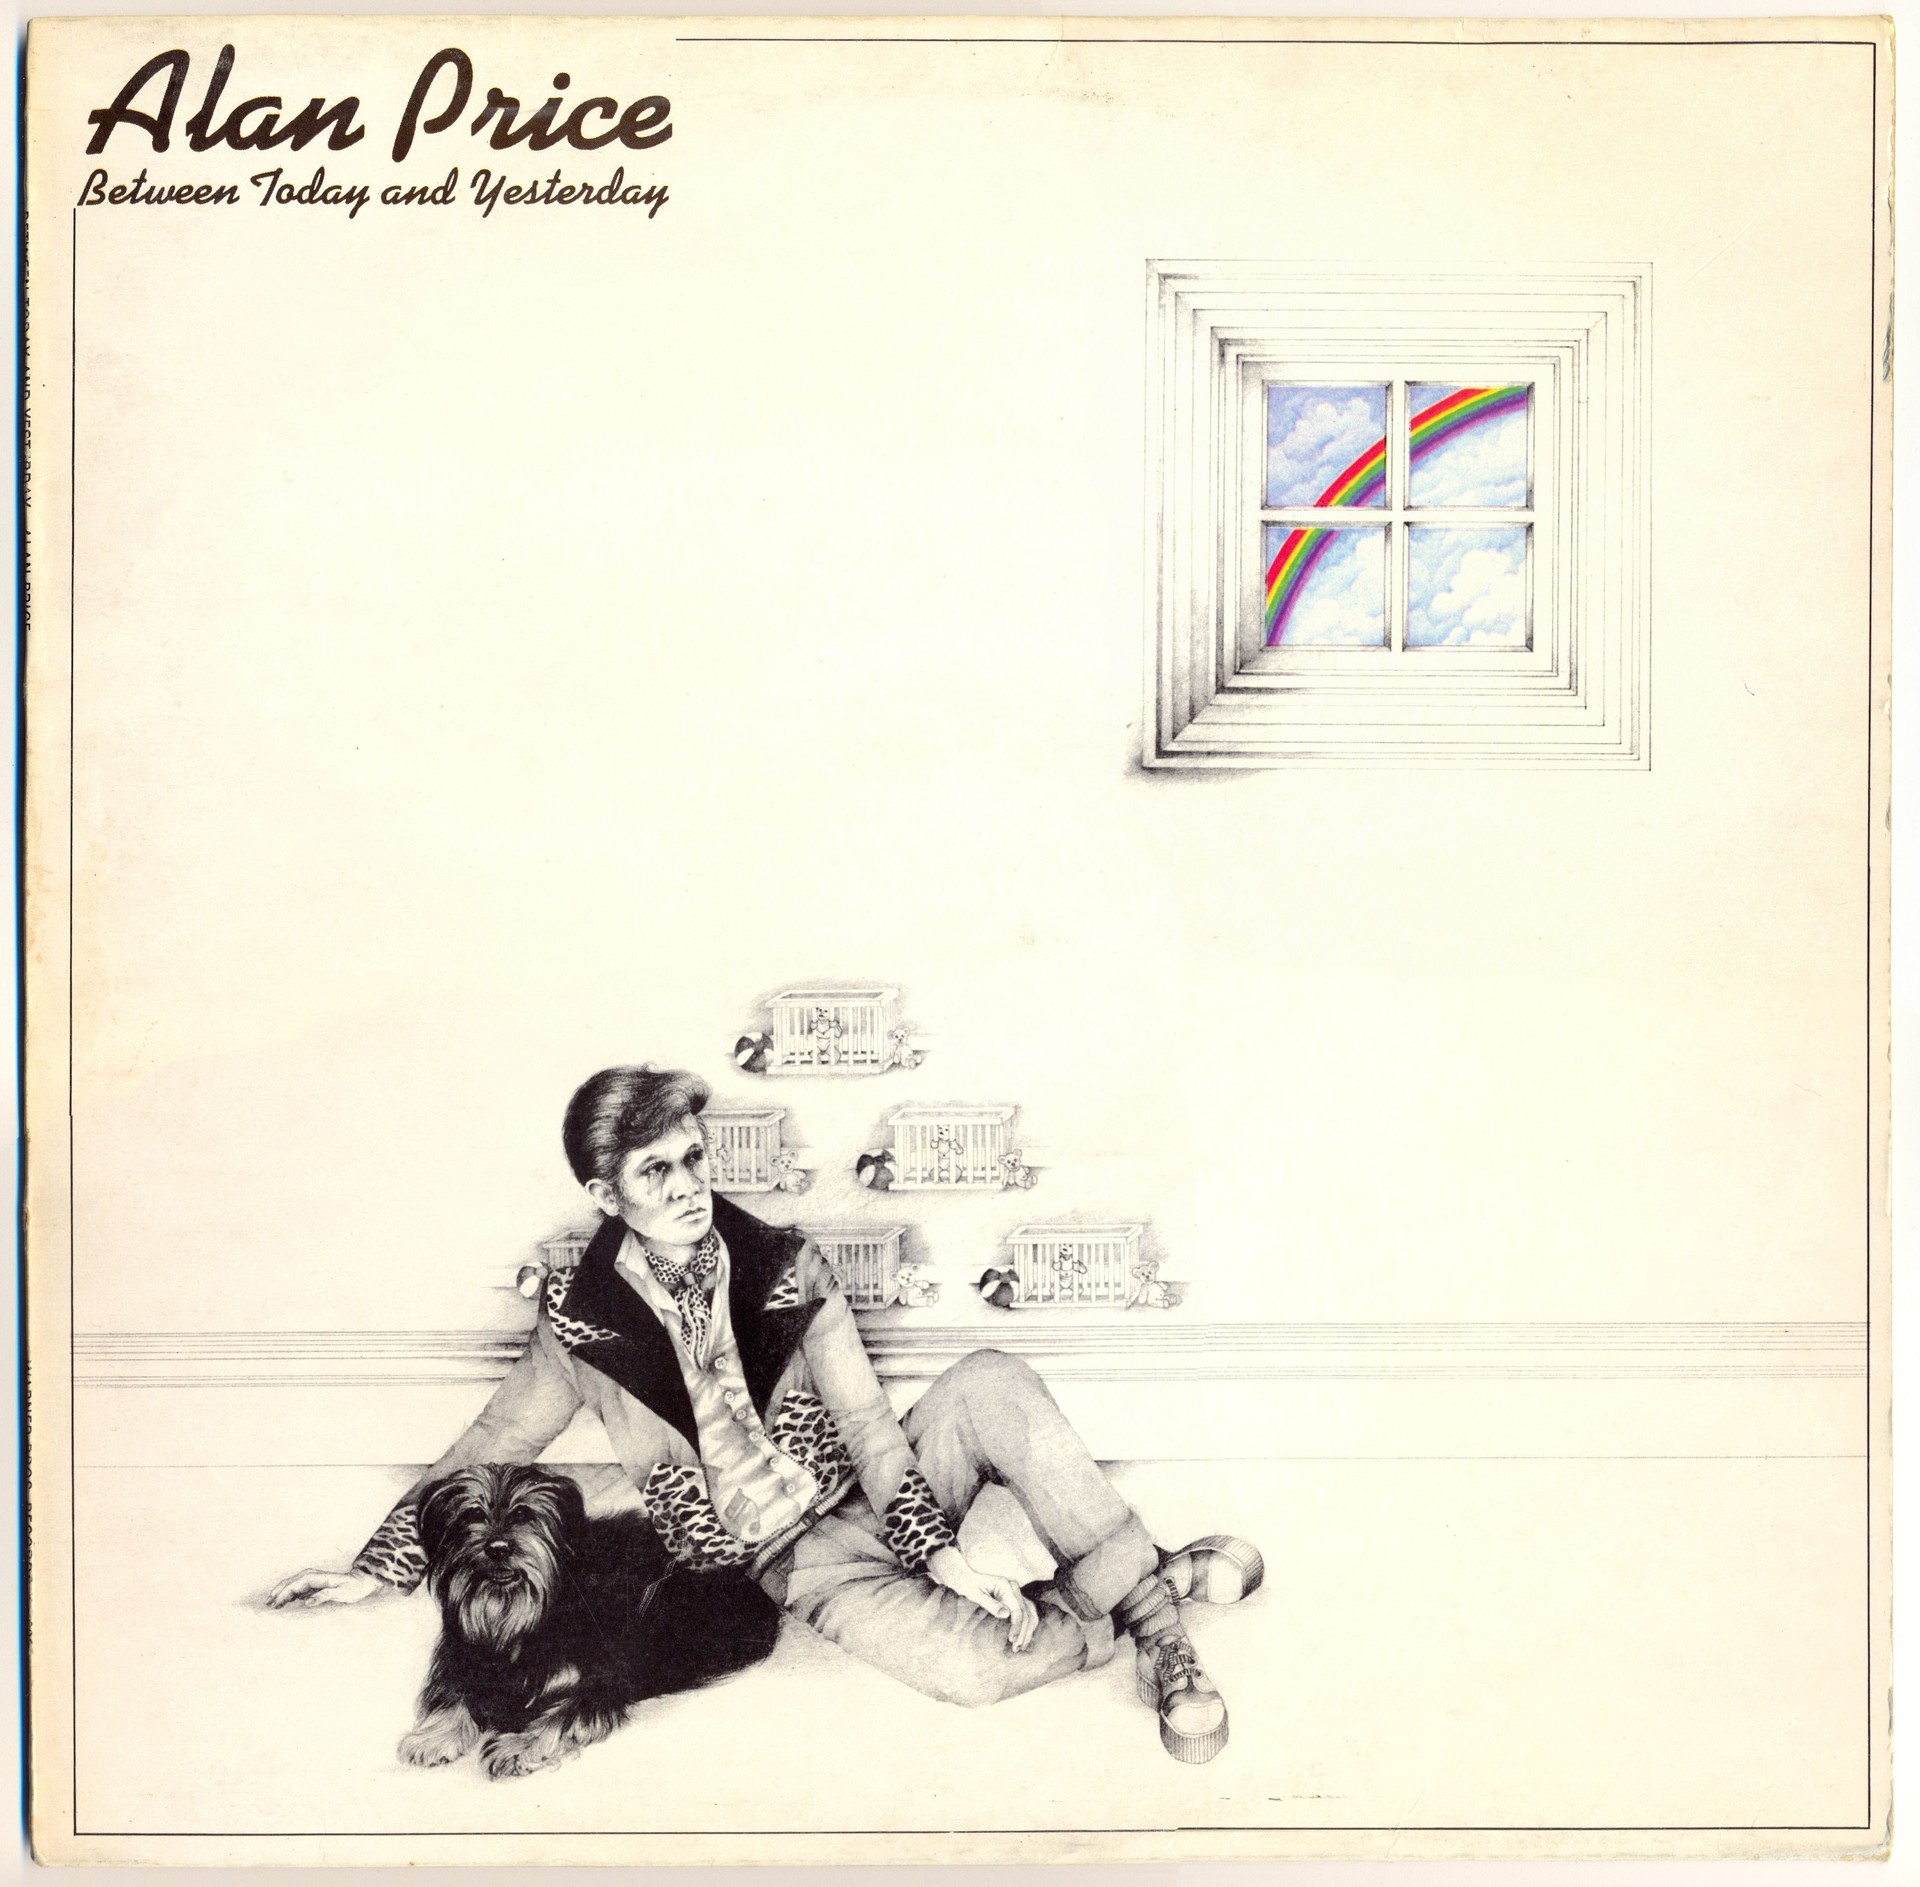 Alan Price 1974 Between Today And Yesterday LP face.jpg